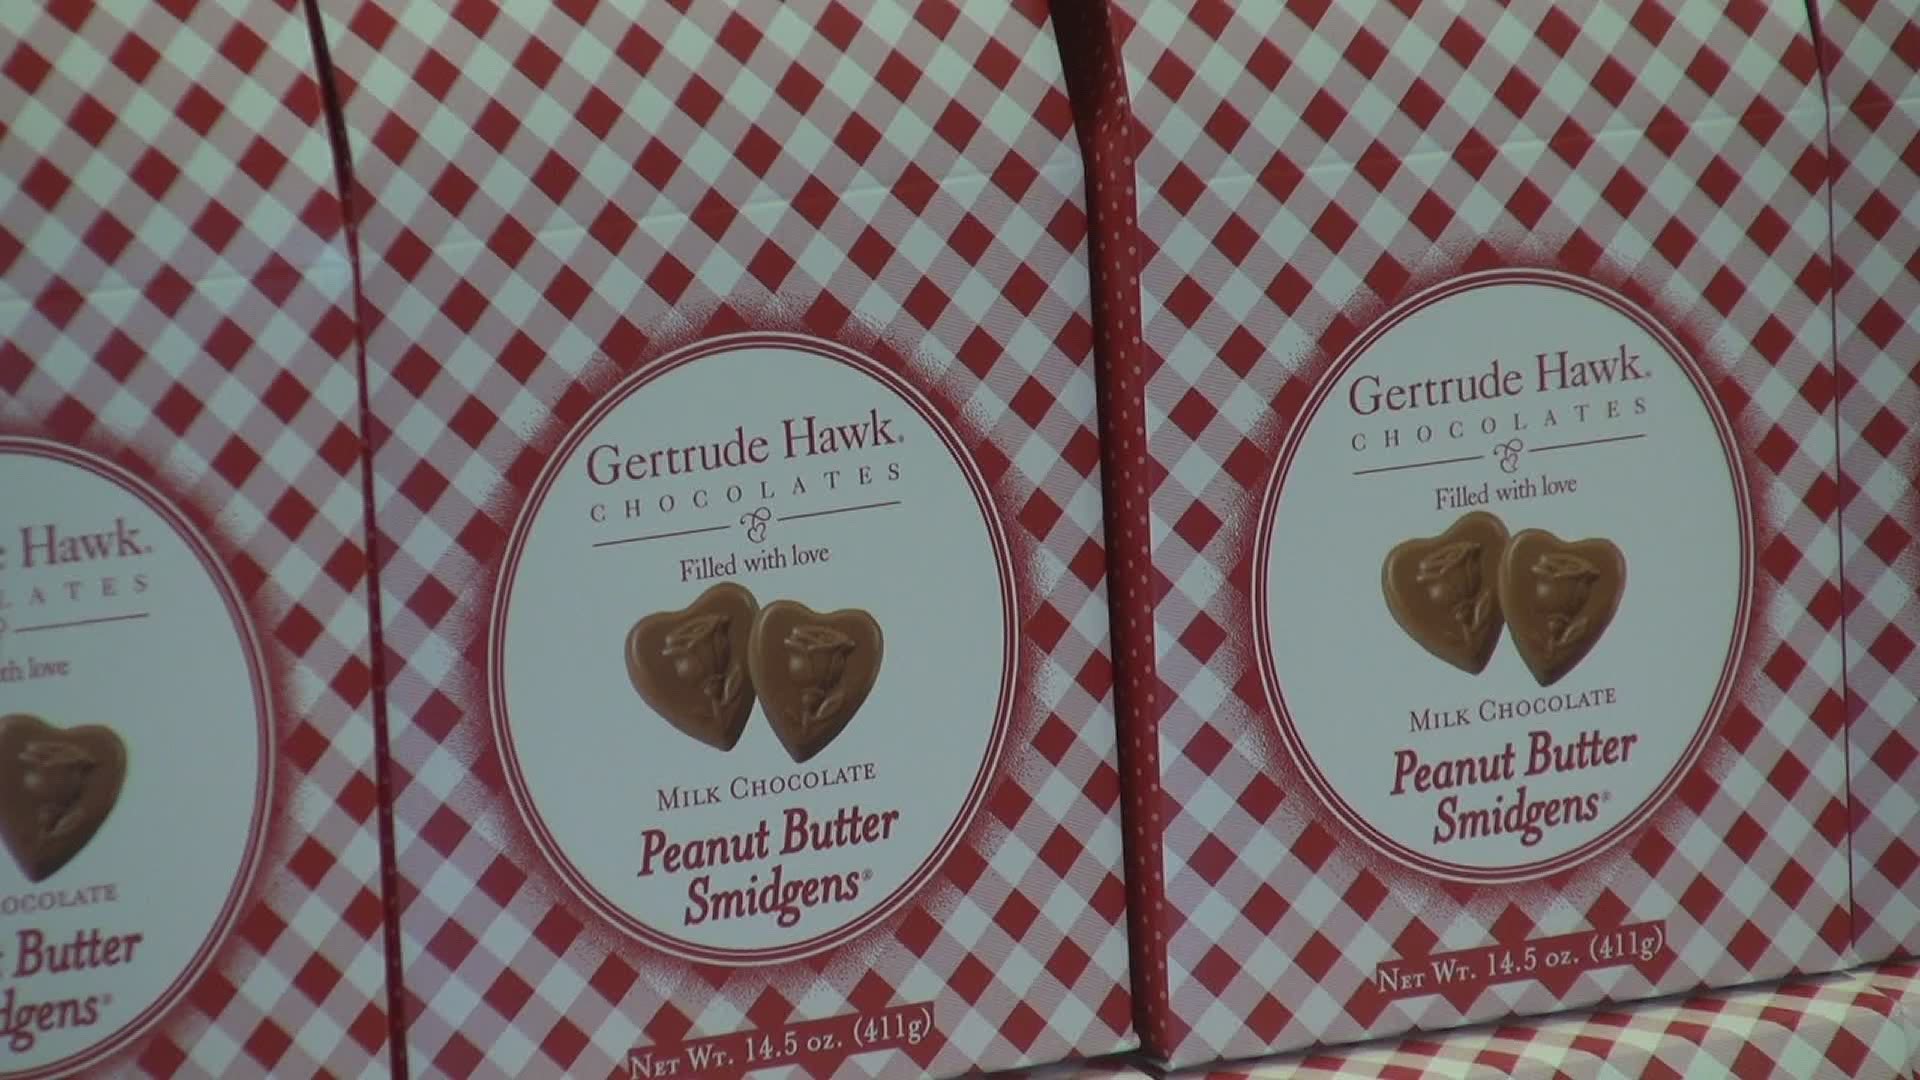 One of the most popular candy shops in our area is getting ready for a big day on Friday.